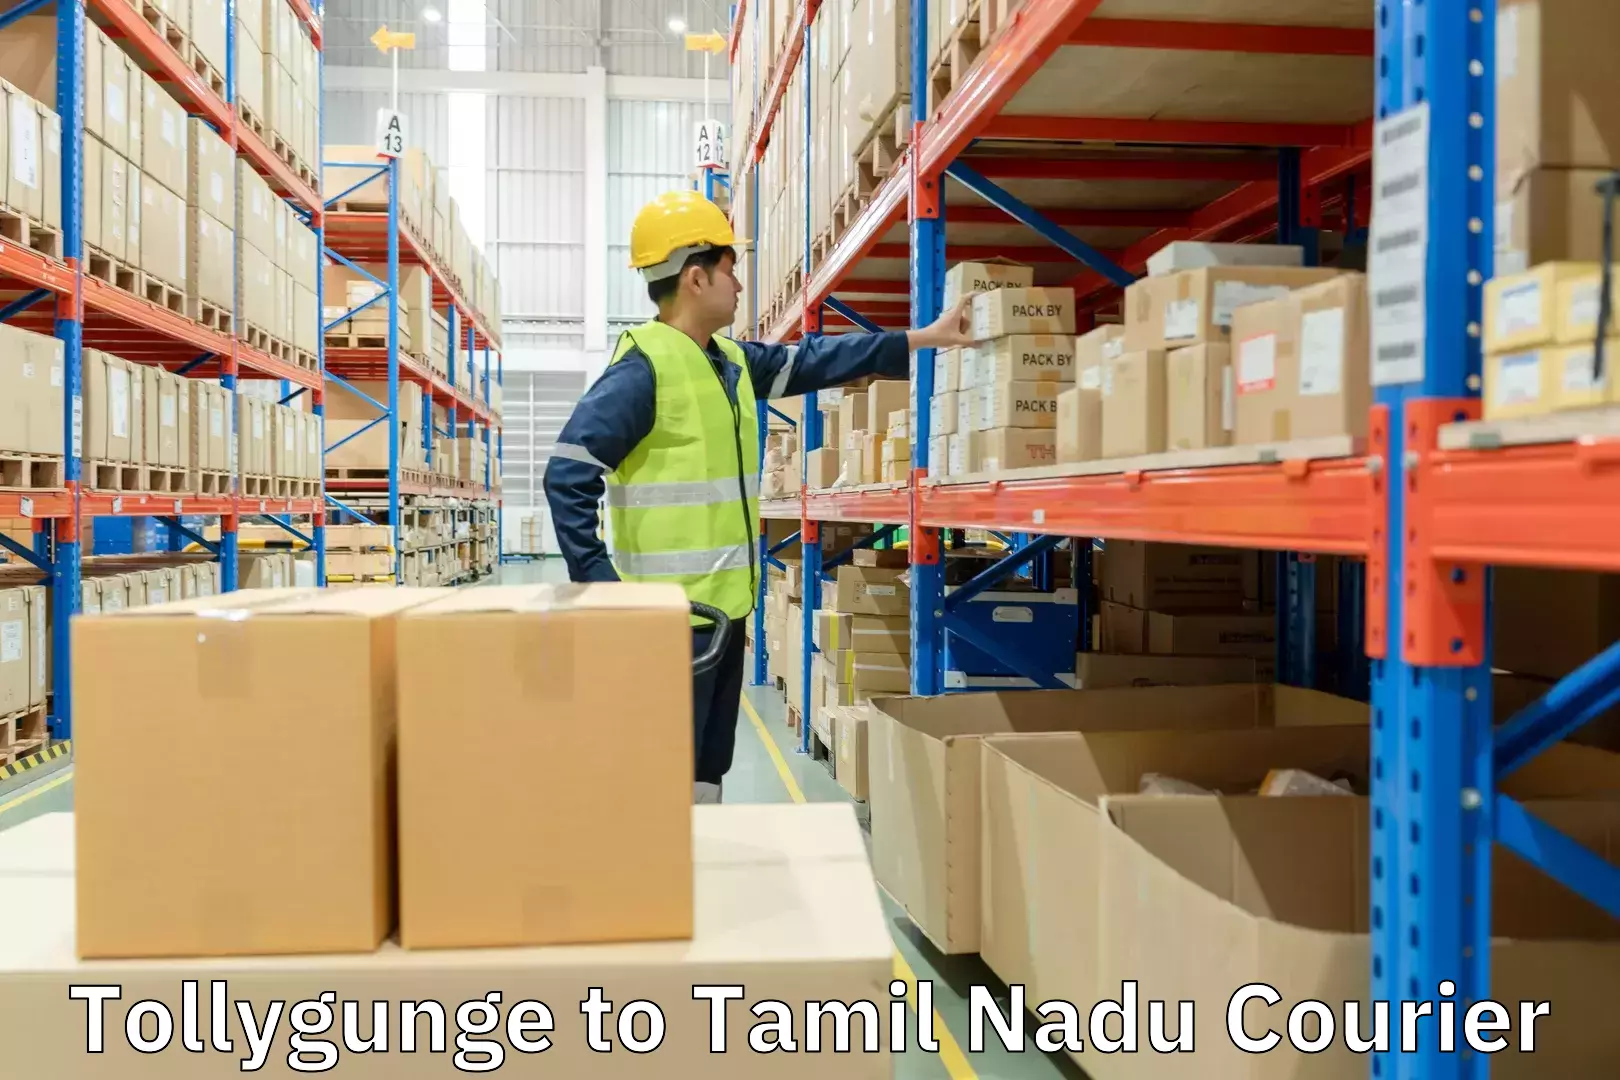 Customer-centric shipping in Tollygunge to Tamil Nadu